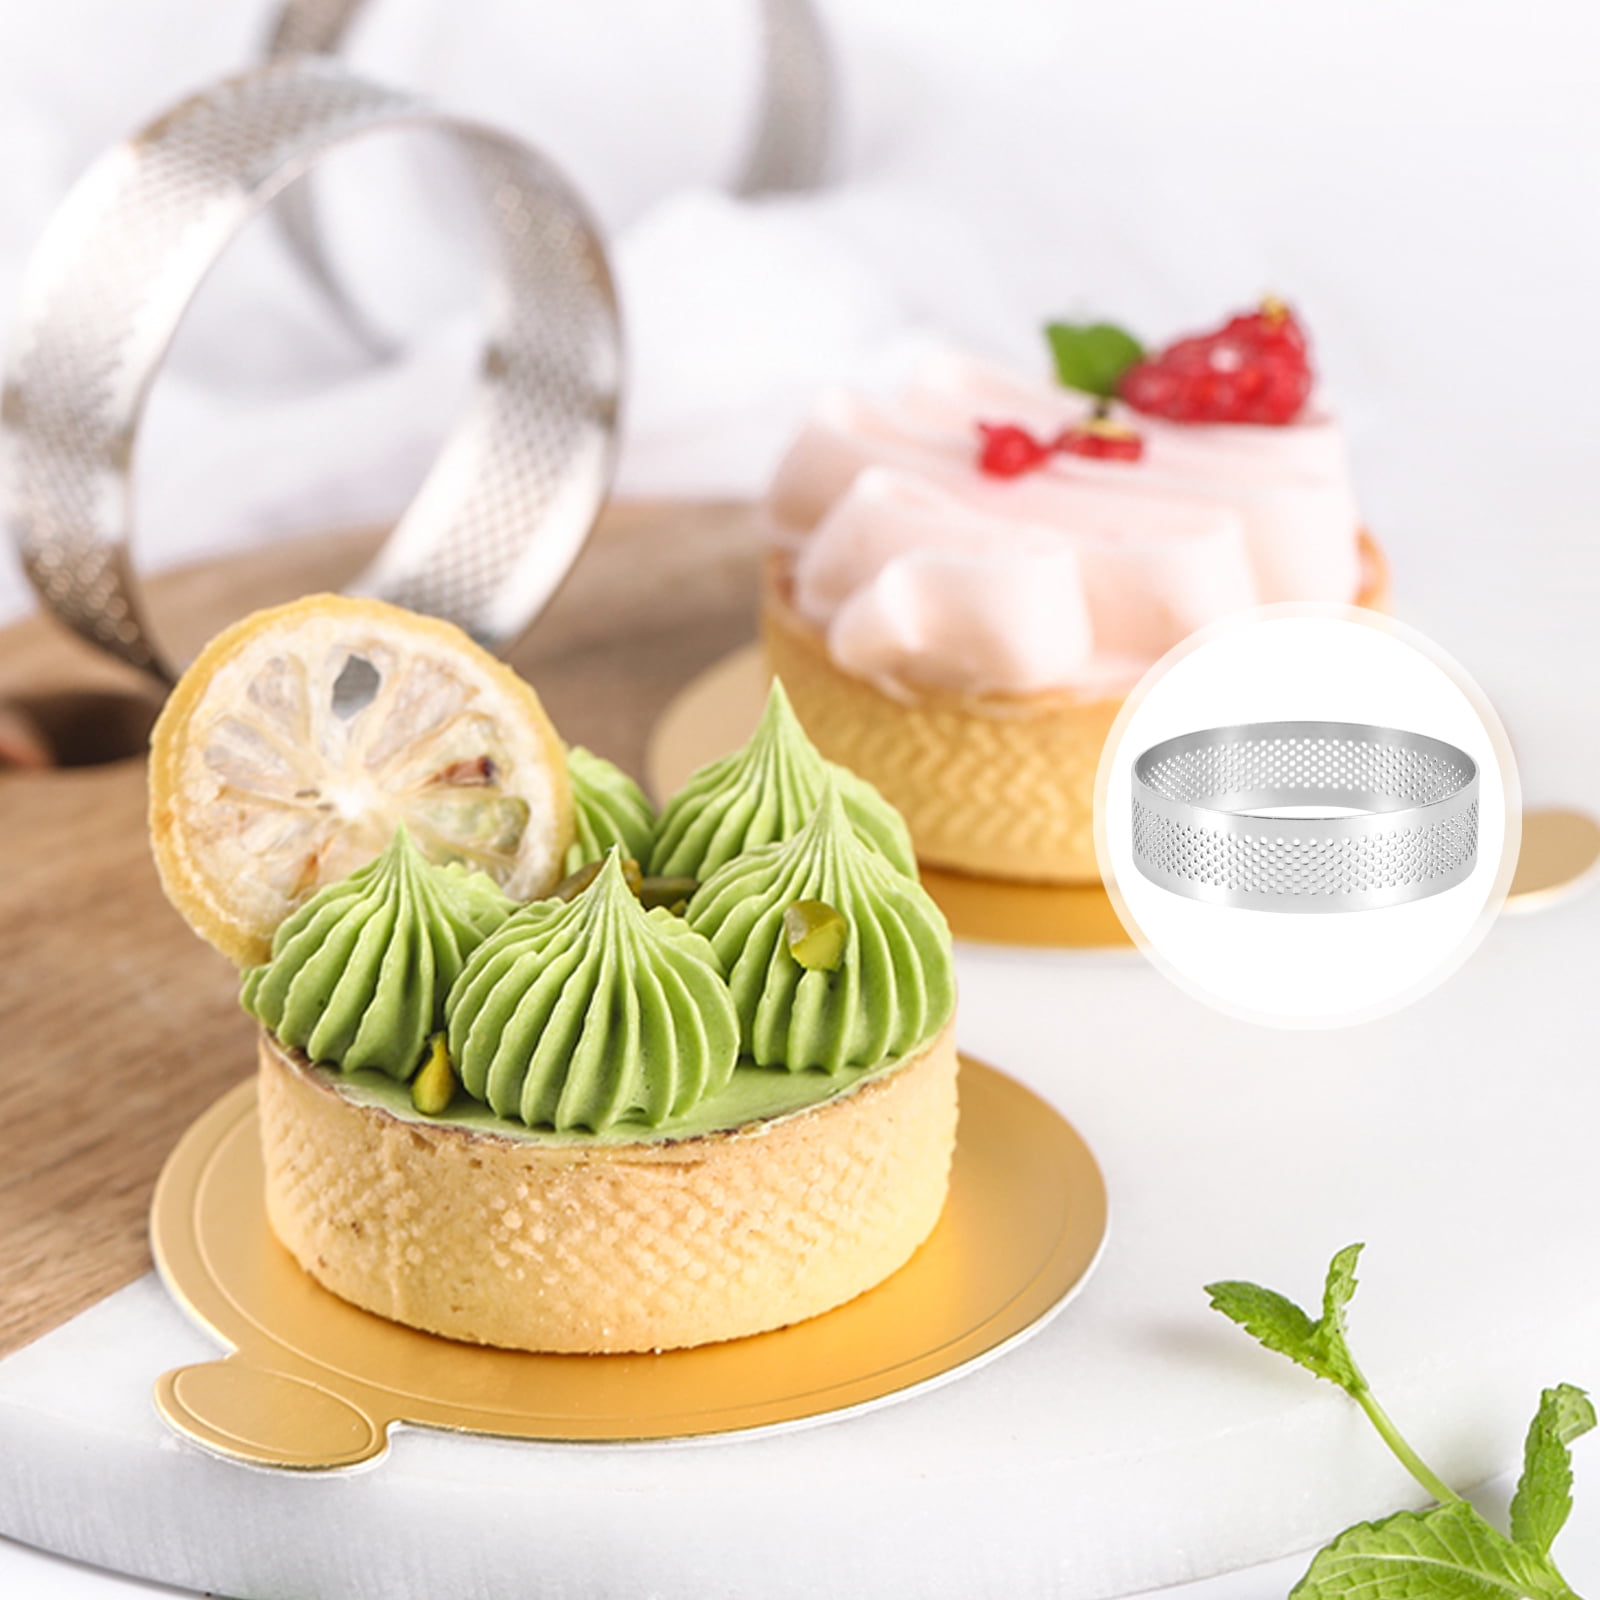 7/8cm Baking Round Perforated Tart Ring Mousse Pie Quiche Circle Mold Shell Pan 